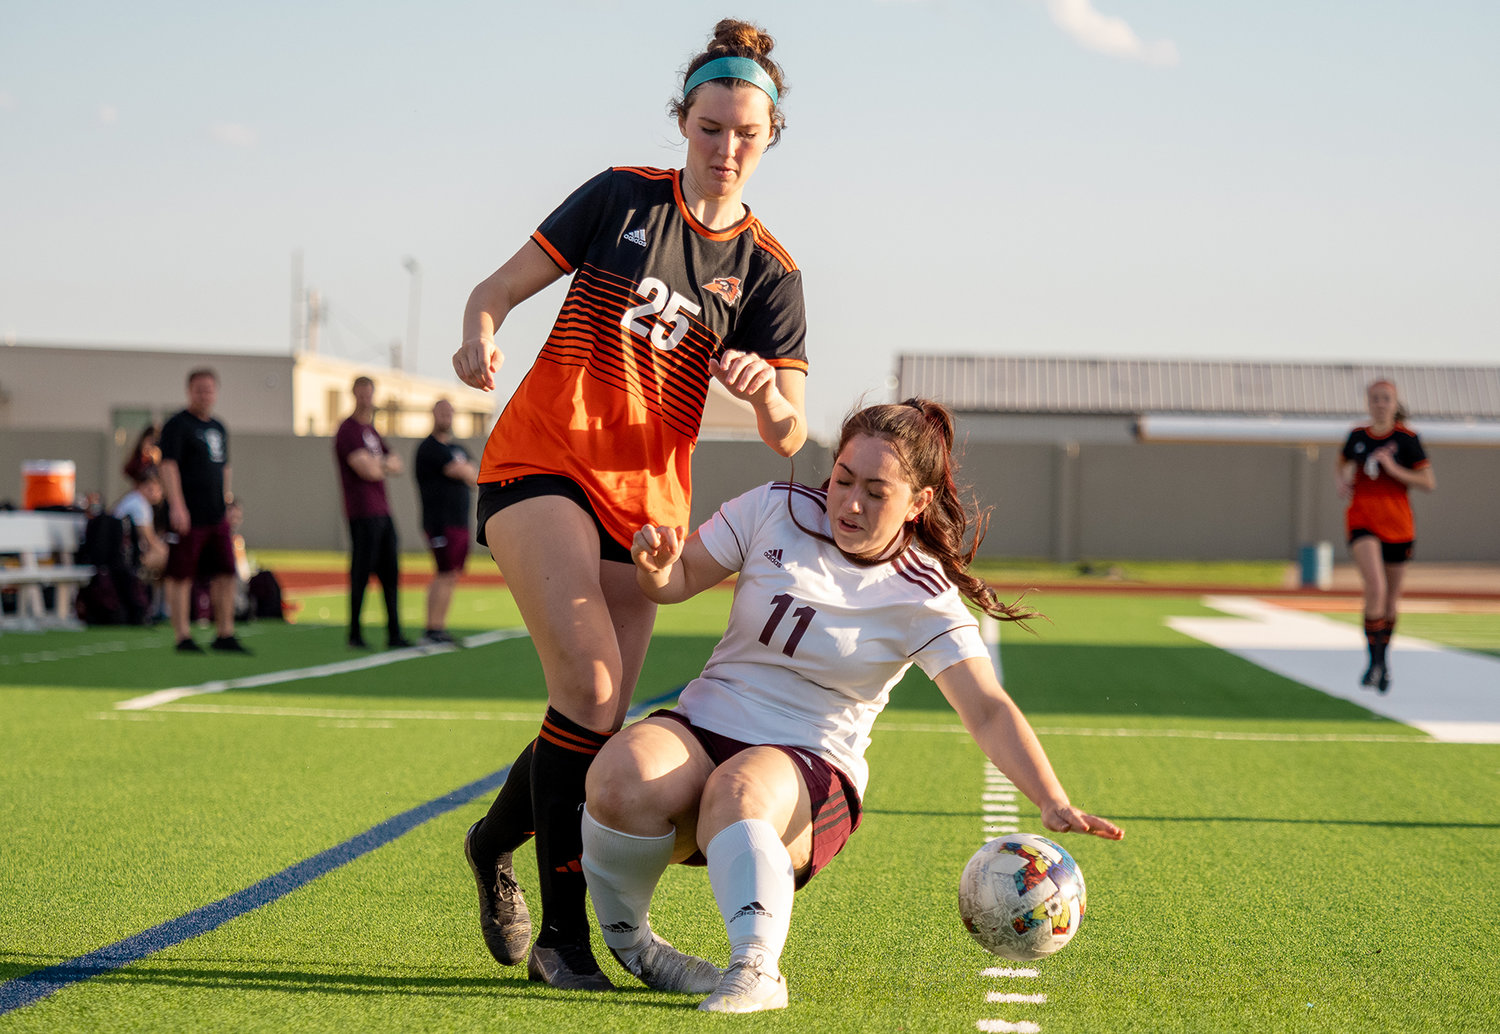 Georgia Zirbser battles a Northside player for control of the ball near the sideline in the bi-district matchup on Friday, March 24. The Ladycats won the match 6-0 to advance in the playoffs.